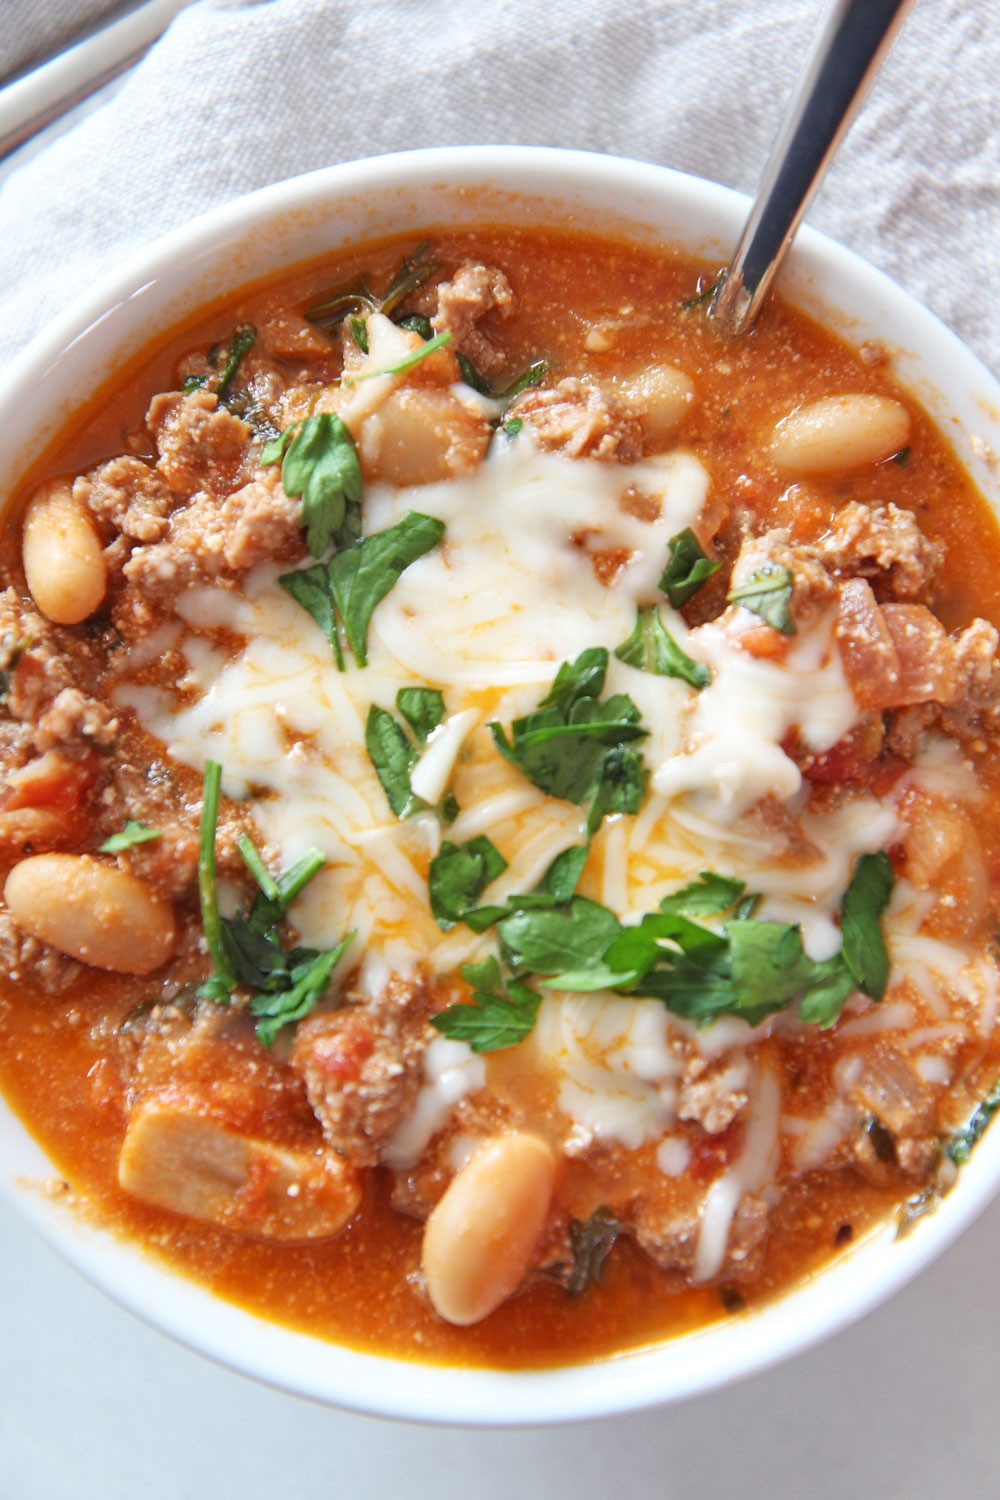 Cheesy Chicken Parmesan Chili Recipe. This is a healthy chili recipe. Quick one pot recipe that cuts the chicken parm cooking in half. Grab ground chicken, onions, garlic, red pepper, ricotta cheese, and more fun flavors. Happy dinner making! www.ChopHappy.com #chili #chickenparmesan